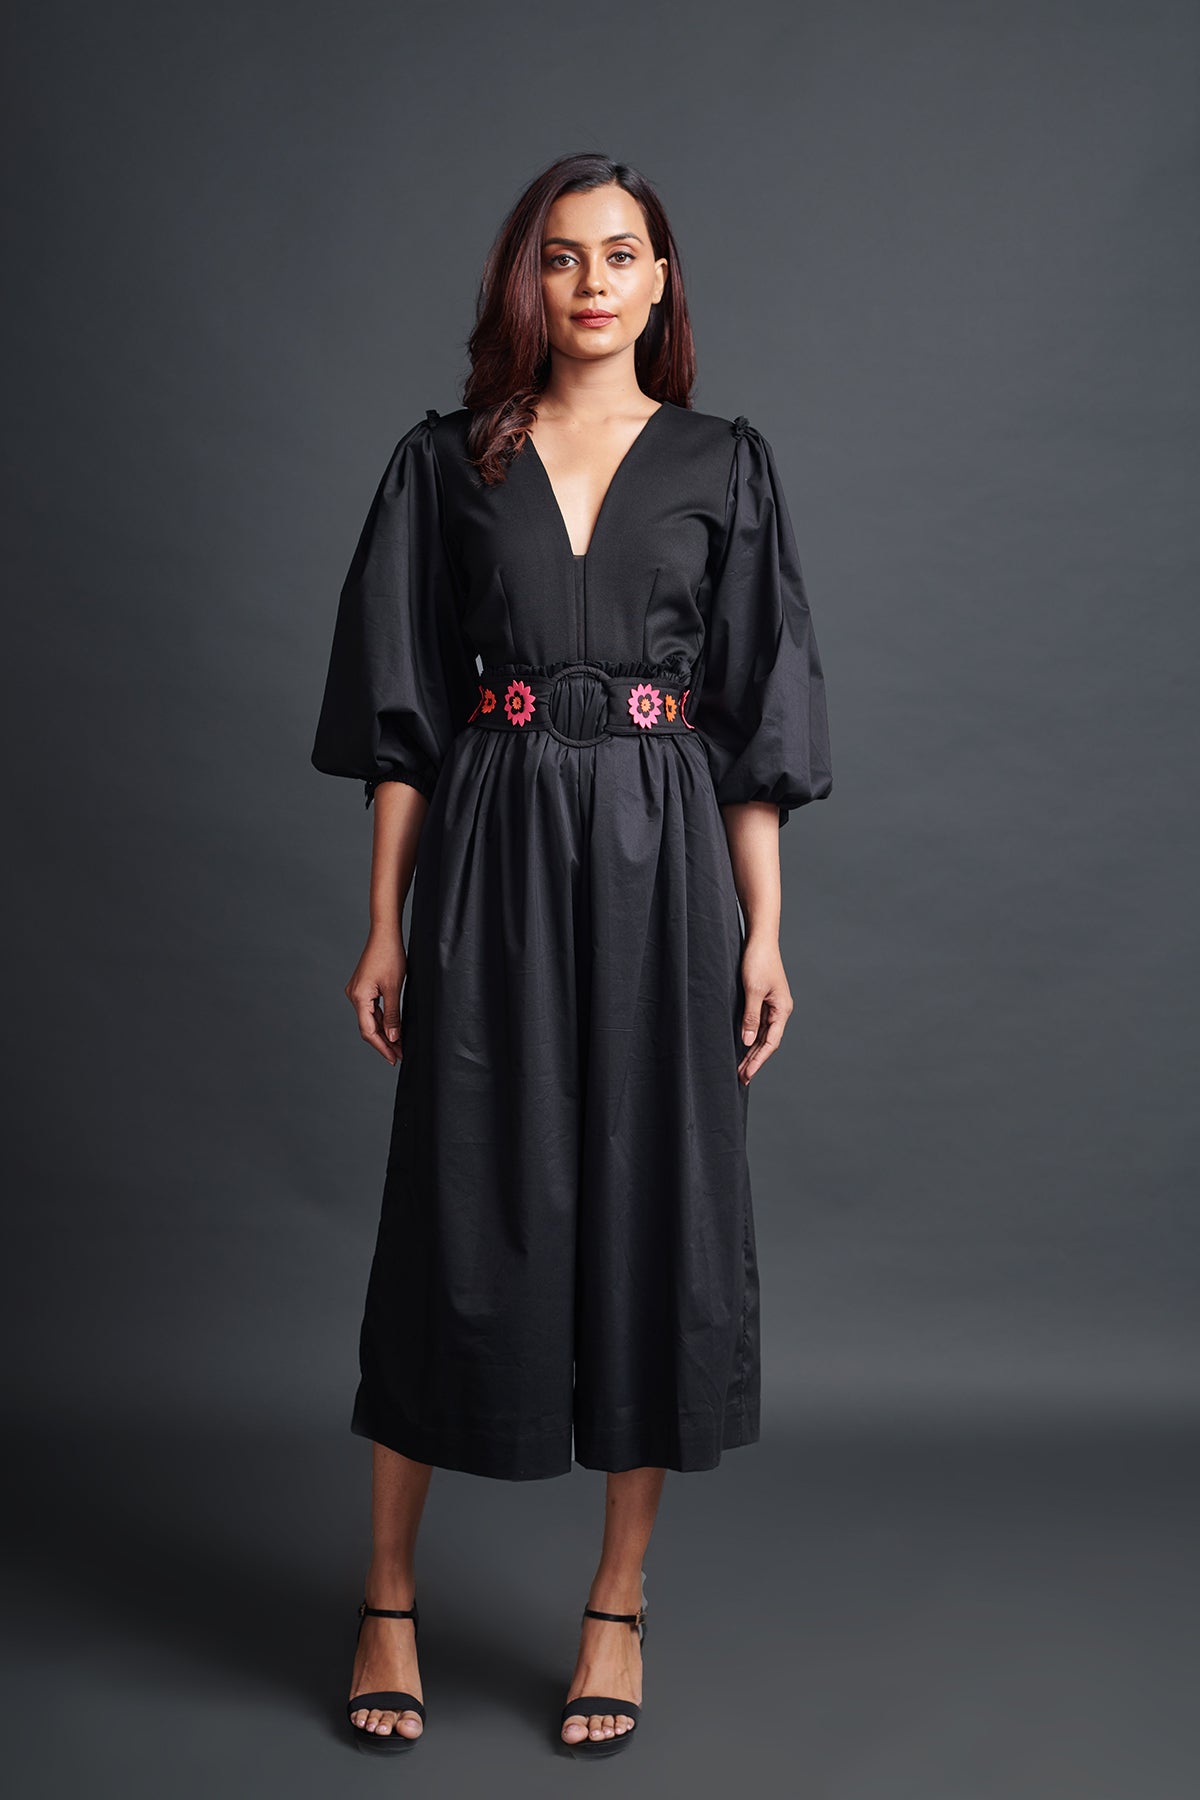 Image of BLACK MONOCROM JUMPSUIT WITH NEOE CONFETTI BELT. From savoirfashions.com